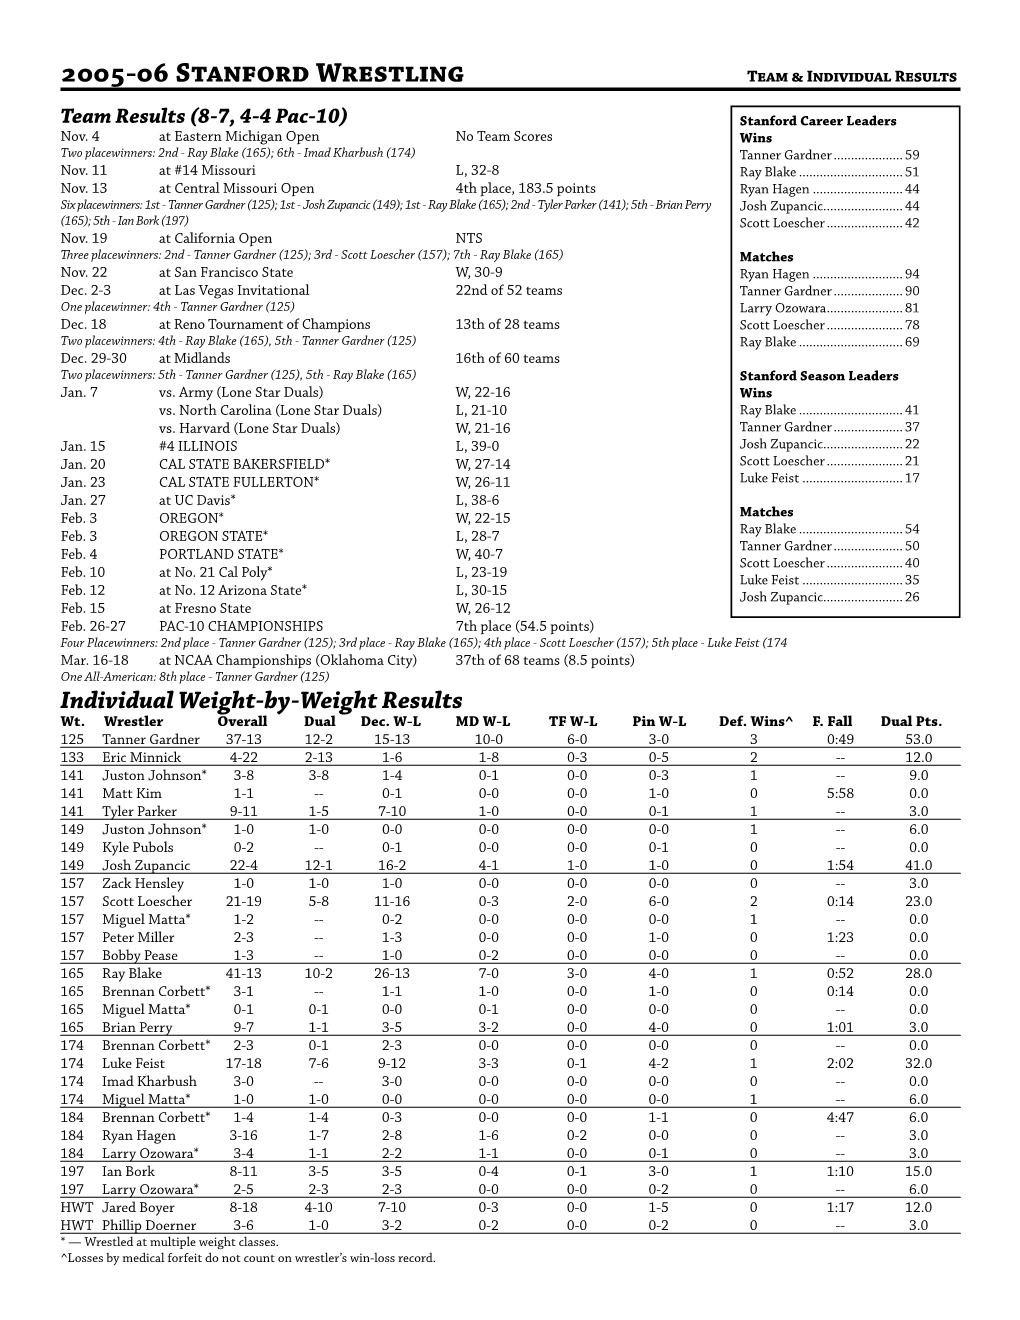 2005-06 Stanford Wrestling Team & Individual Results